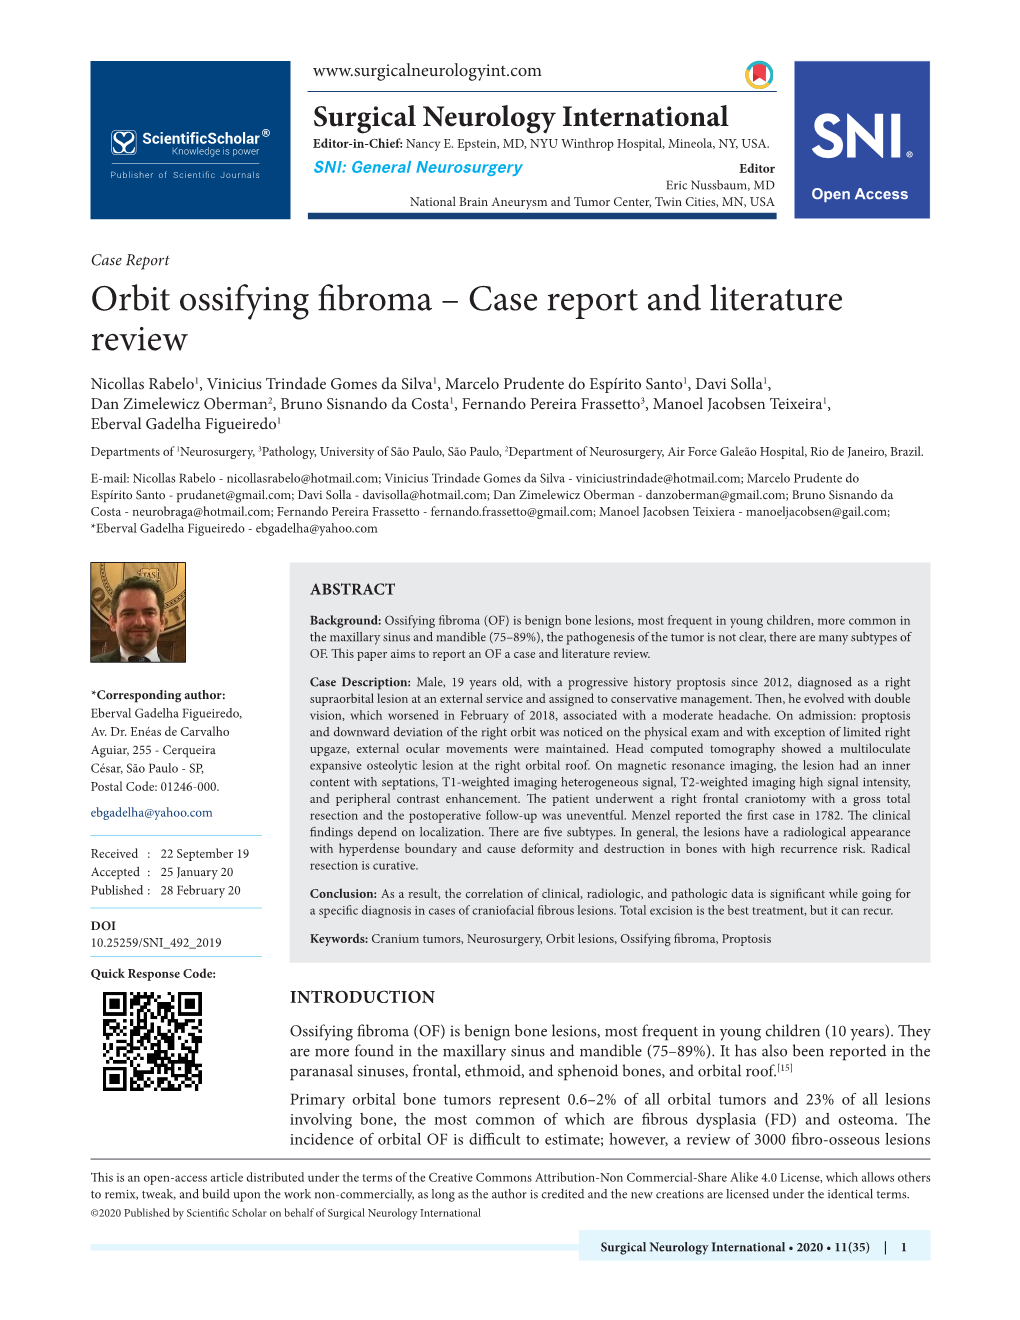 Orbit Ossifying Fibroma – Case Report and Literature Review